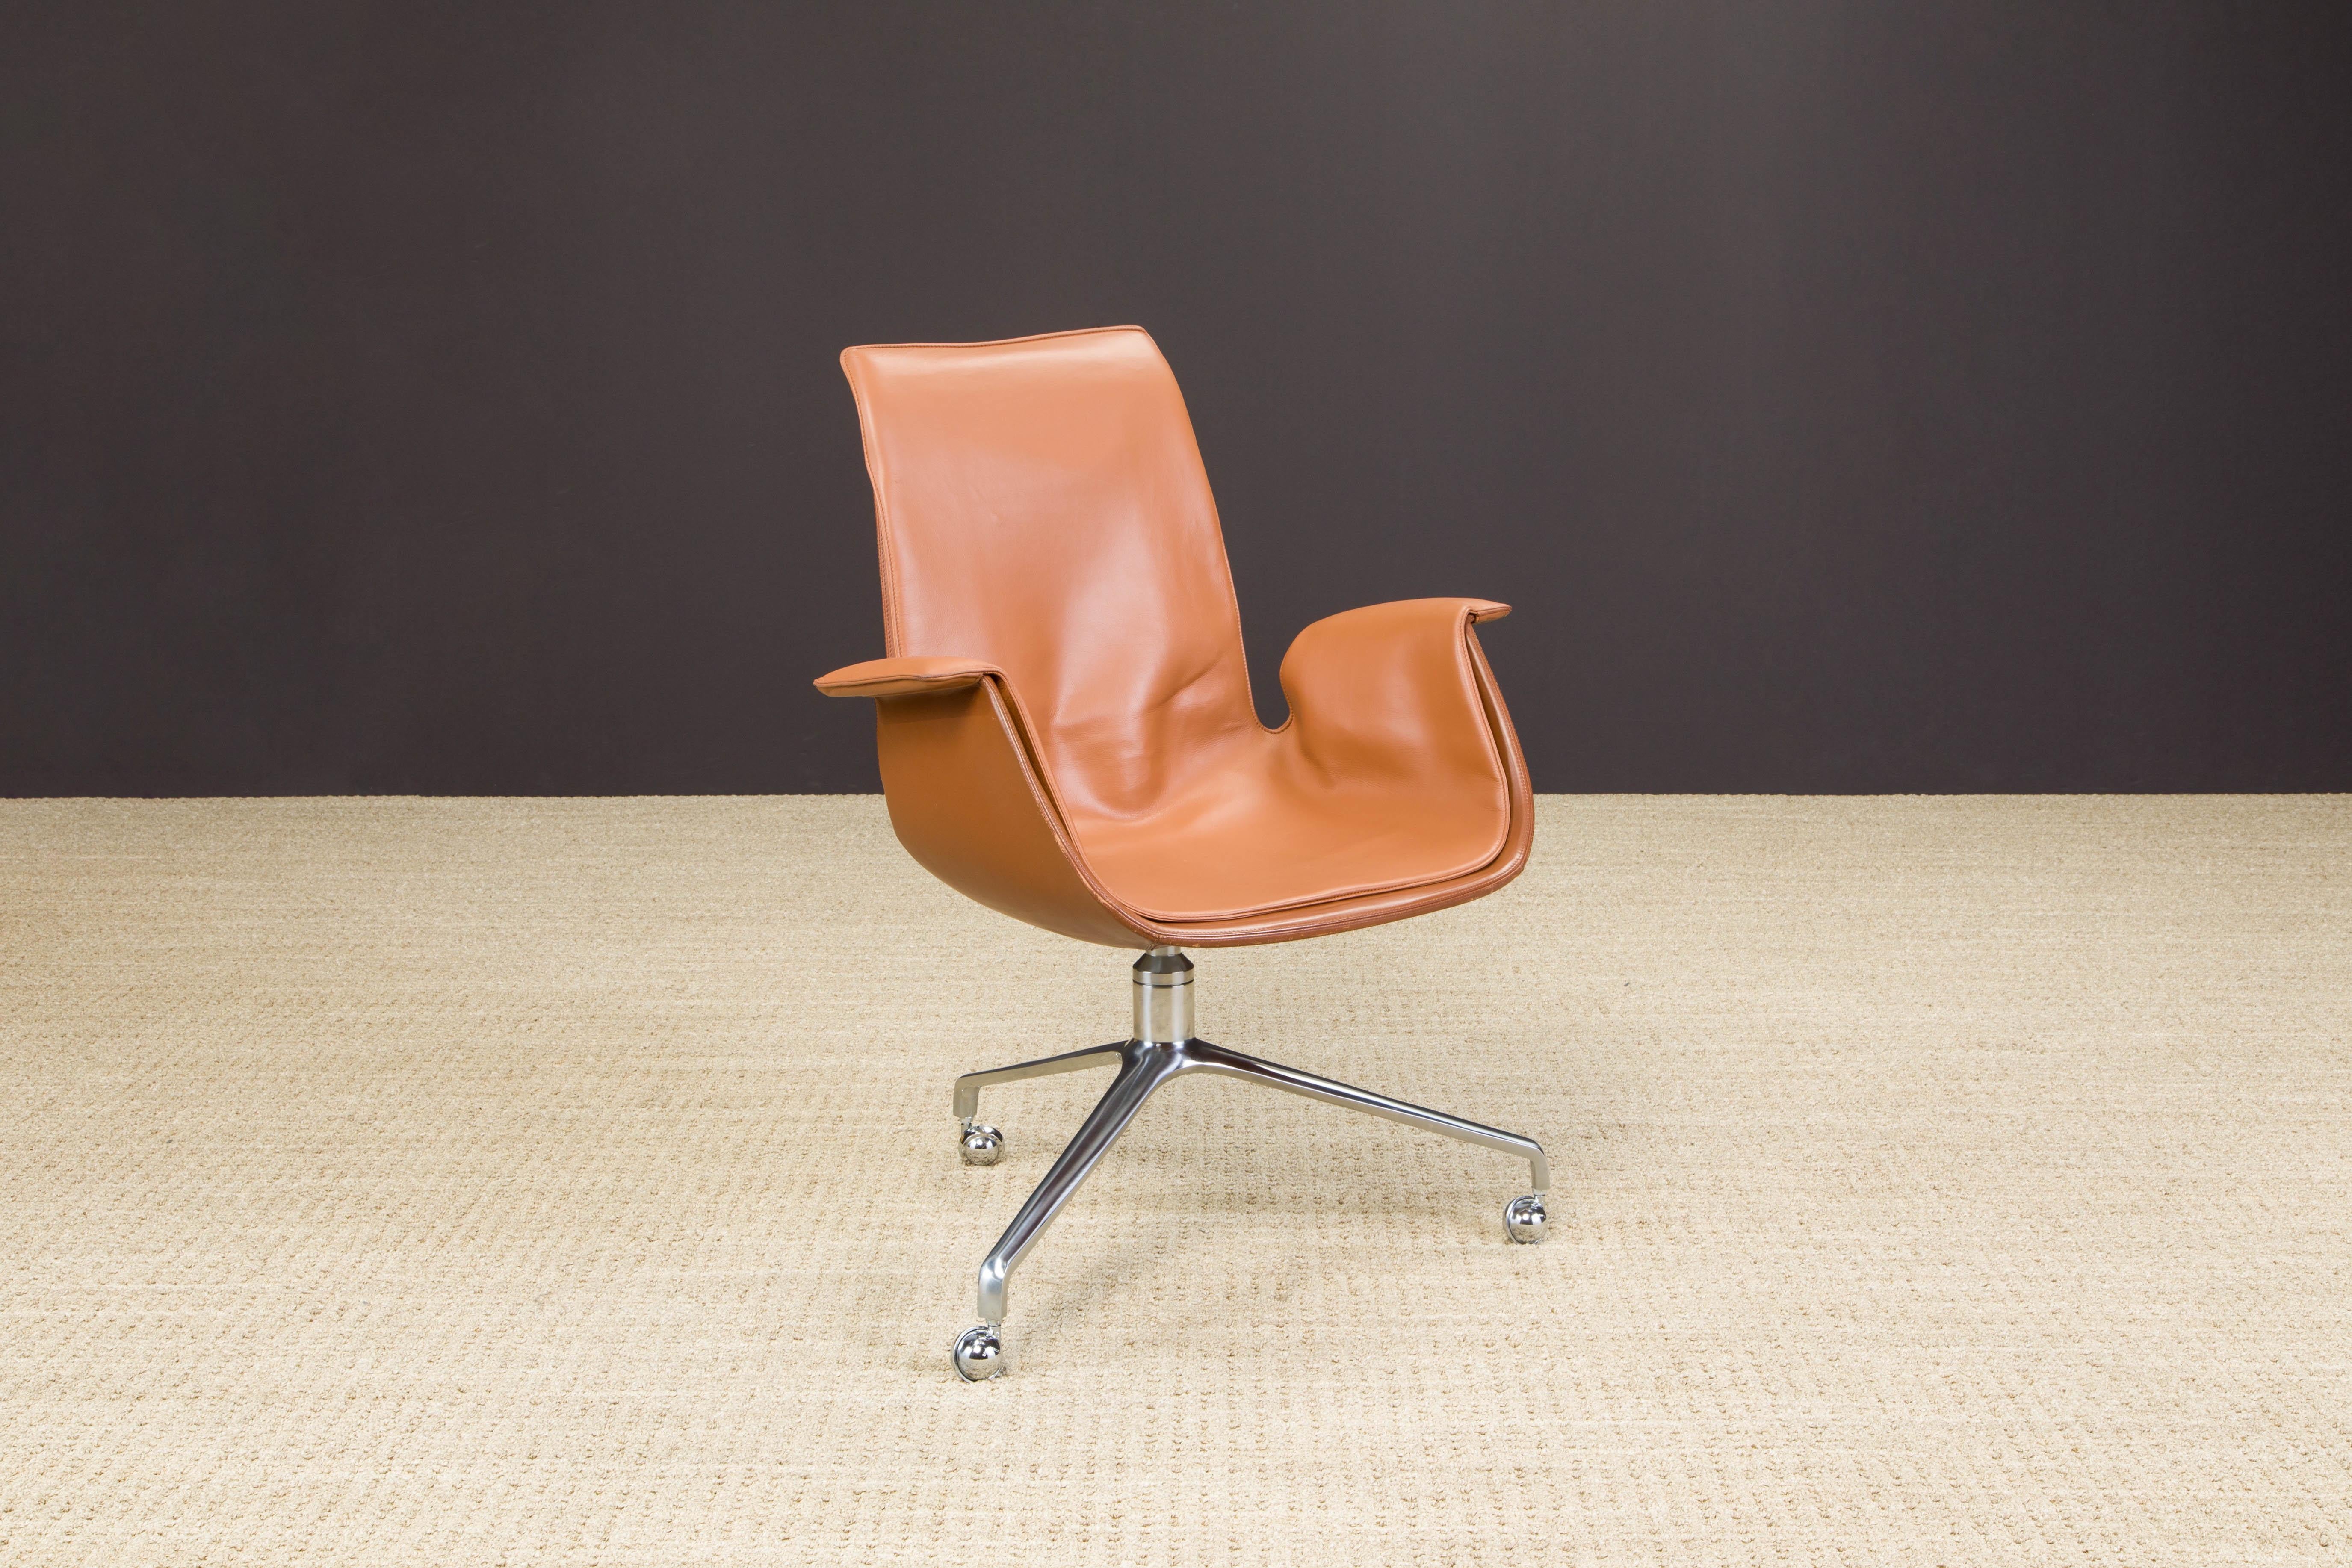 A gorgeous original classic low-back 'bucket' version of the Model FK-6725 cognac brown leather 'Bird' chair, also commonly referred to as the 'Tulip' chair and originally called the 'Bucket' chair, designed by Preben Fabricius and Jørgen Kastholm,